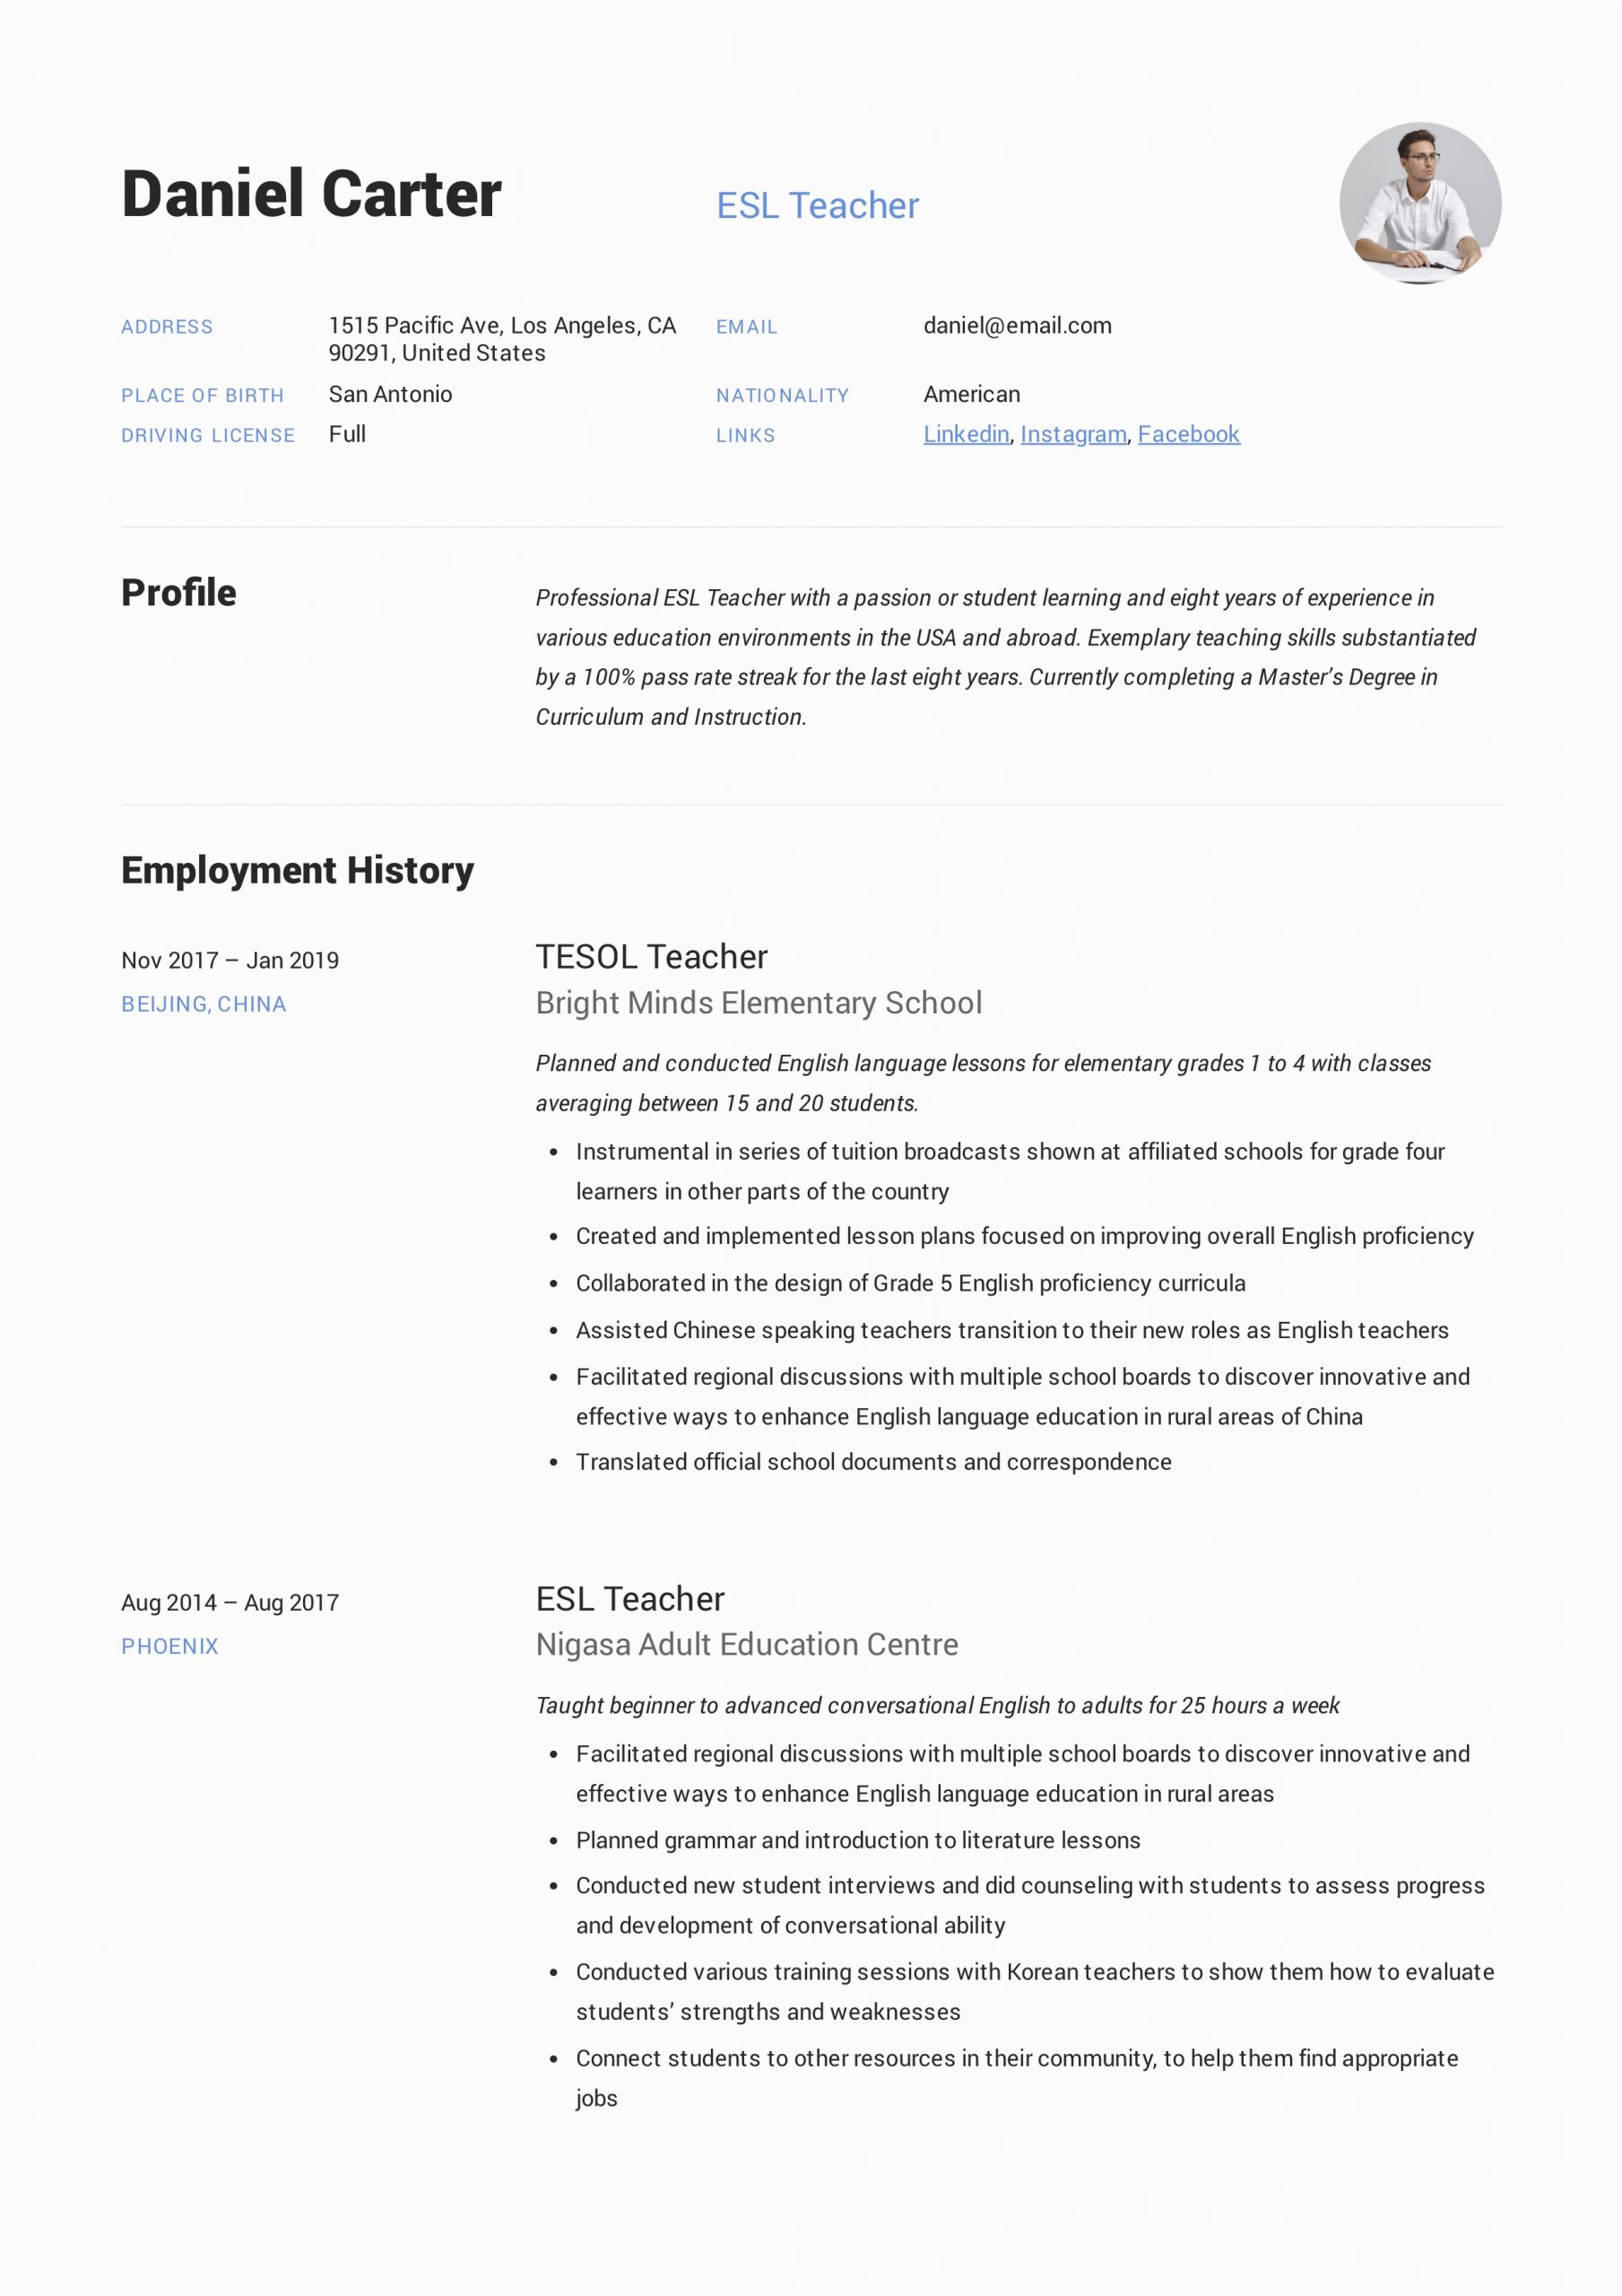 Sample Resume for Teaching Job with Experience 19 Esl Teacher Resume Examples & Writing Guide